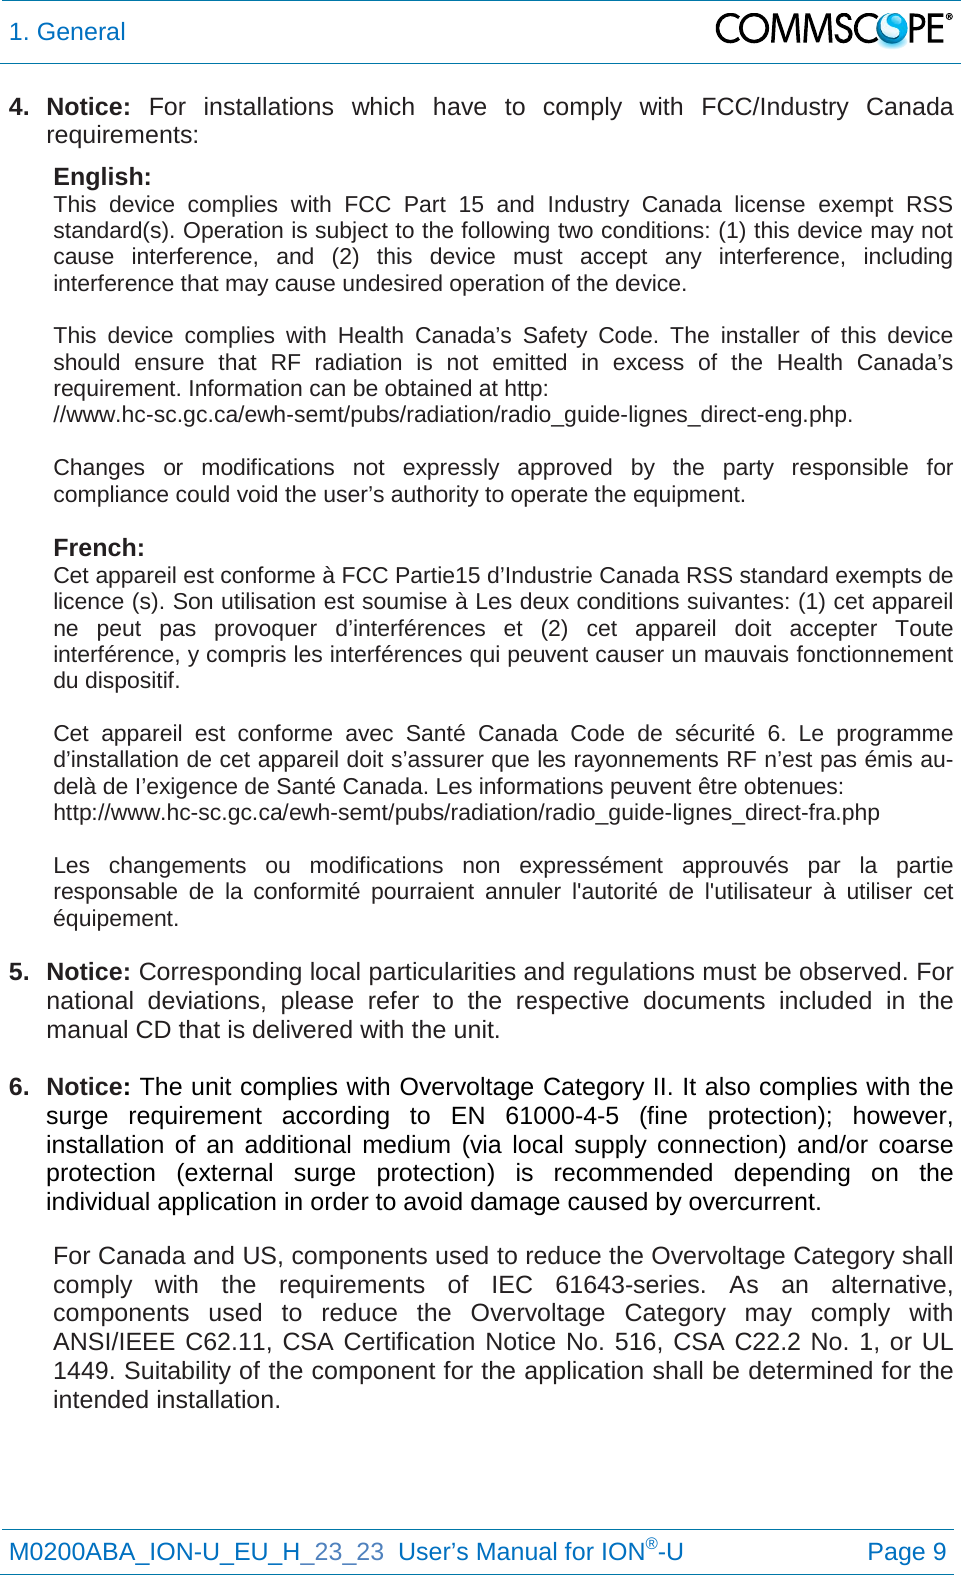 1. General   M0200ABA_ION-U_EU_H_23_23  User’s Manual for ION®-U  Page 9  4. Notice:  For installations which have to comply with FCC/Industry Canada requirements: English: This device complies with FCC Part 15 and Industry Canada license exempt RSS standard(s). Operation is subject to the following two conditions: (1) this device may not cause interference, and (2) this device must accept any interference, including interference that may cause undesired operation of the device.  This device complies with Health Canada’s Safety Code. The installer of this device should ensure that RF radiation is not emitted in excess of the Health Canada’s requirement. Information can be obtained at http: //www.hc-sc.gc.ca/ewh-semt/pubs/radiation/radio_guide-lignes_direct-eng.php.  Changes or modifications not expressly approved by the party responsible for compliance could void the user’s authority to operate the equipment.  French: Cet appareil est conforme à FCC Partie15 d’Industrie Canada RSS standard exempts de licence (s). Son utilisation est soumise à Les deux conditions suivantes: (1) cet appareil ne peut pas provoquer d’interférences et (2) cet appareil doit accepter Toute interférence, y compris les interférences qui peuvent causer un mauvais fonctionnement du dispositif.  Cet appareil est conforme avec Santé Canada Code de sécurité 6. Le programme d’installation de cet appareil doit s’assurer que les rayonnements RF n’est pas émis au-delà de I’exigence de Santé Canada. Les informations peuvent être obtenues: http://www.hc-sc.gc.ca/ewh-semt/pubs/radiation/radio_guide-lignes_direct-fra.php  Les changements ou modifications non expressément approuvés par la partie responsable de la conformité pourraient annuler l&apos;autorité de l&apos;utilisateur à utiliser cet équipement.  5. Notice: Corresponding local particularities and regulations must be observed. For national deviations, please refer to the respective documents included in the manual CD that is delivered with the unit.  6. Notice: The unit complies with Overvoltage Category II. It also complies with the surge requirement according to EN 61000-4-5 (fine protection); however, installation of an additional medium (via local supply connection) and/or coarse protection (external surge protection) is recommended depending on the individual application in order to avoid damage caused by overcurrent. For Canada and US, components used to reduce the Overvoltage Category shall comply with the requirements of IEC 61643-series. As an alternative, components used to reduce the Overvoltage Category may comply with ANSI/IEEE C62.11, CSA Certification Notice No. 516, CSA C22.2 No. 1, or UL 1449. Suitability of the component for the application shall be determined for the intended installation.     